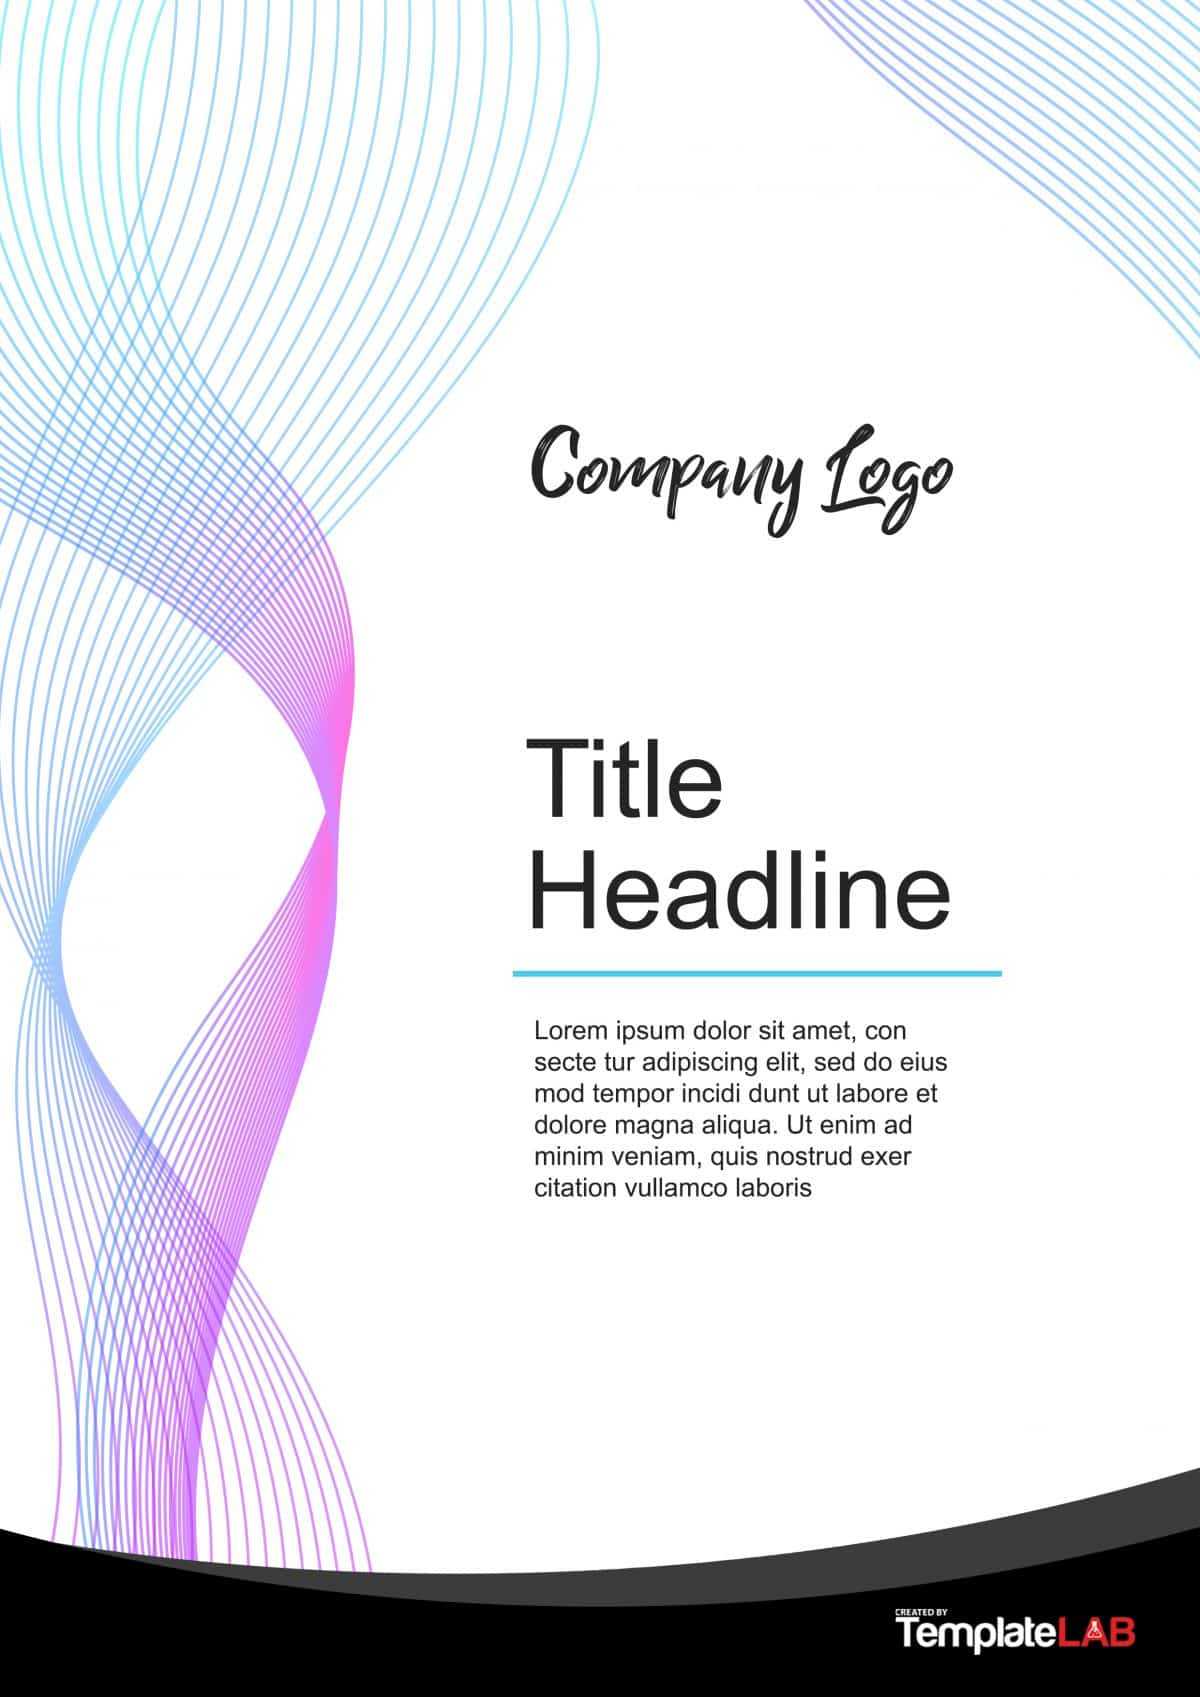 39 Amazing Cover Page Templates (Word + Psd) ᐅ Template Lab Regarding Word Title Page Templates